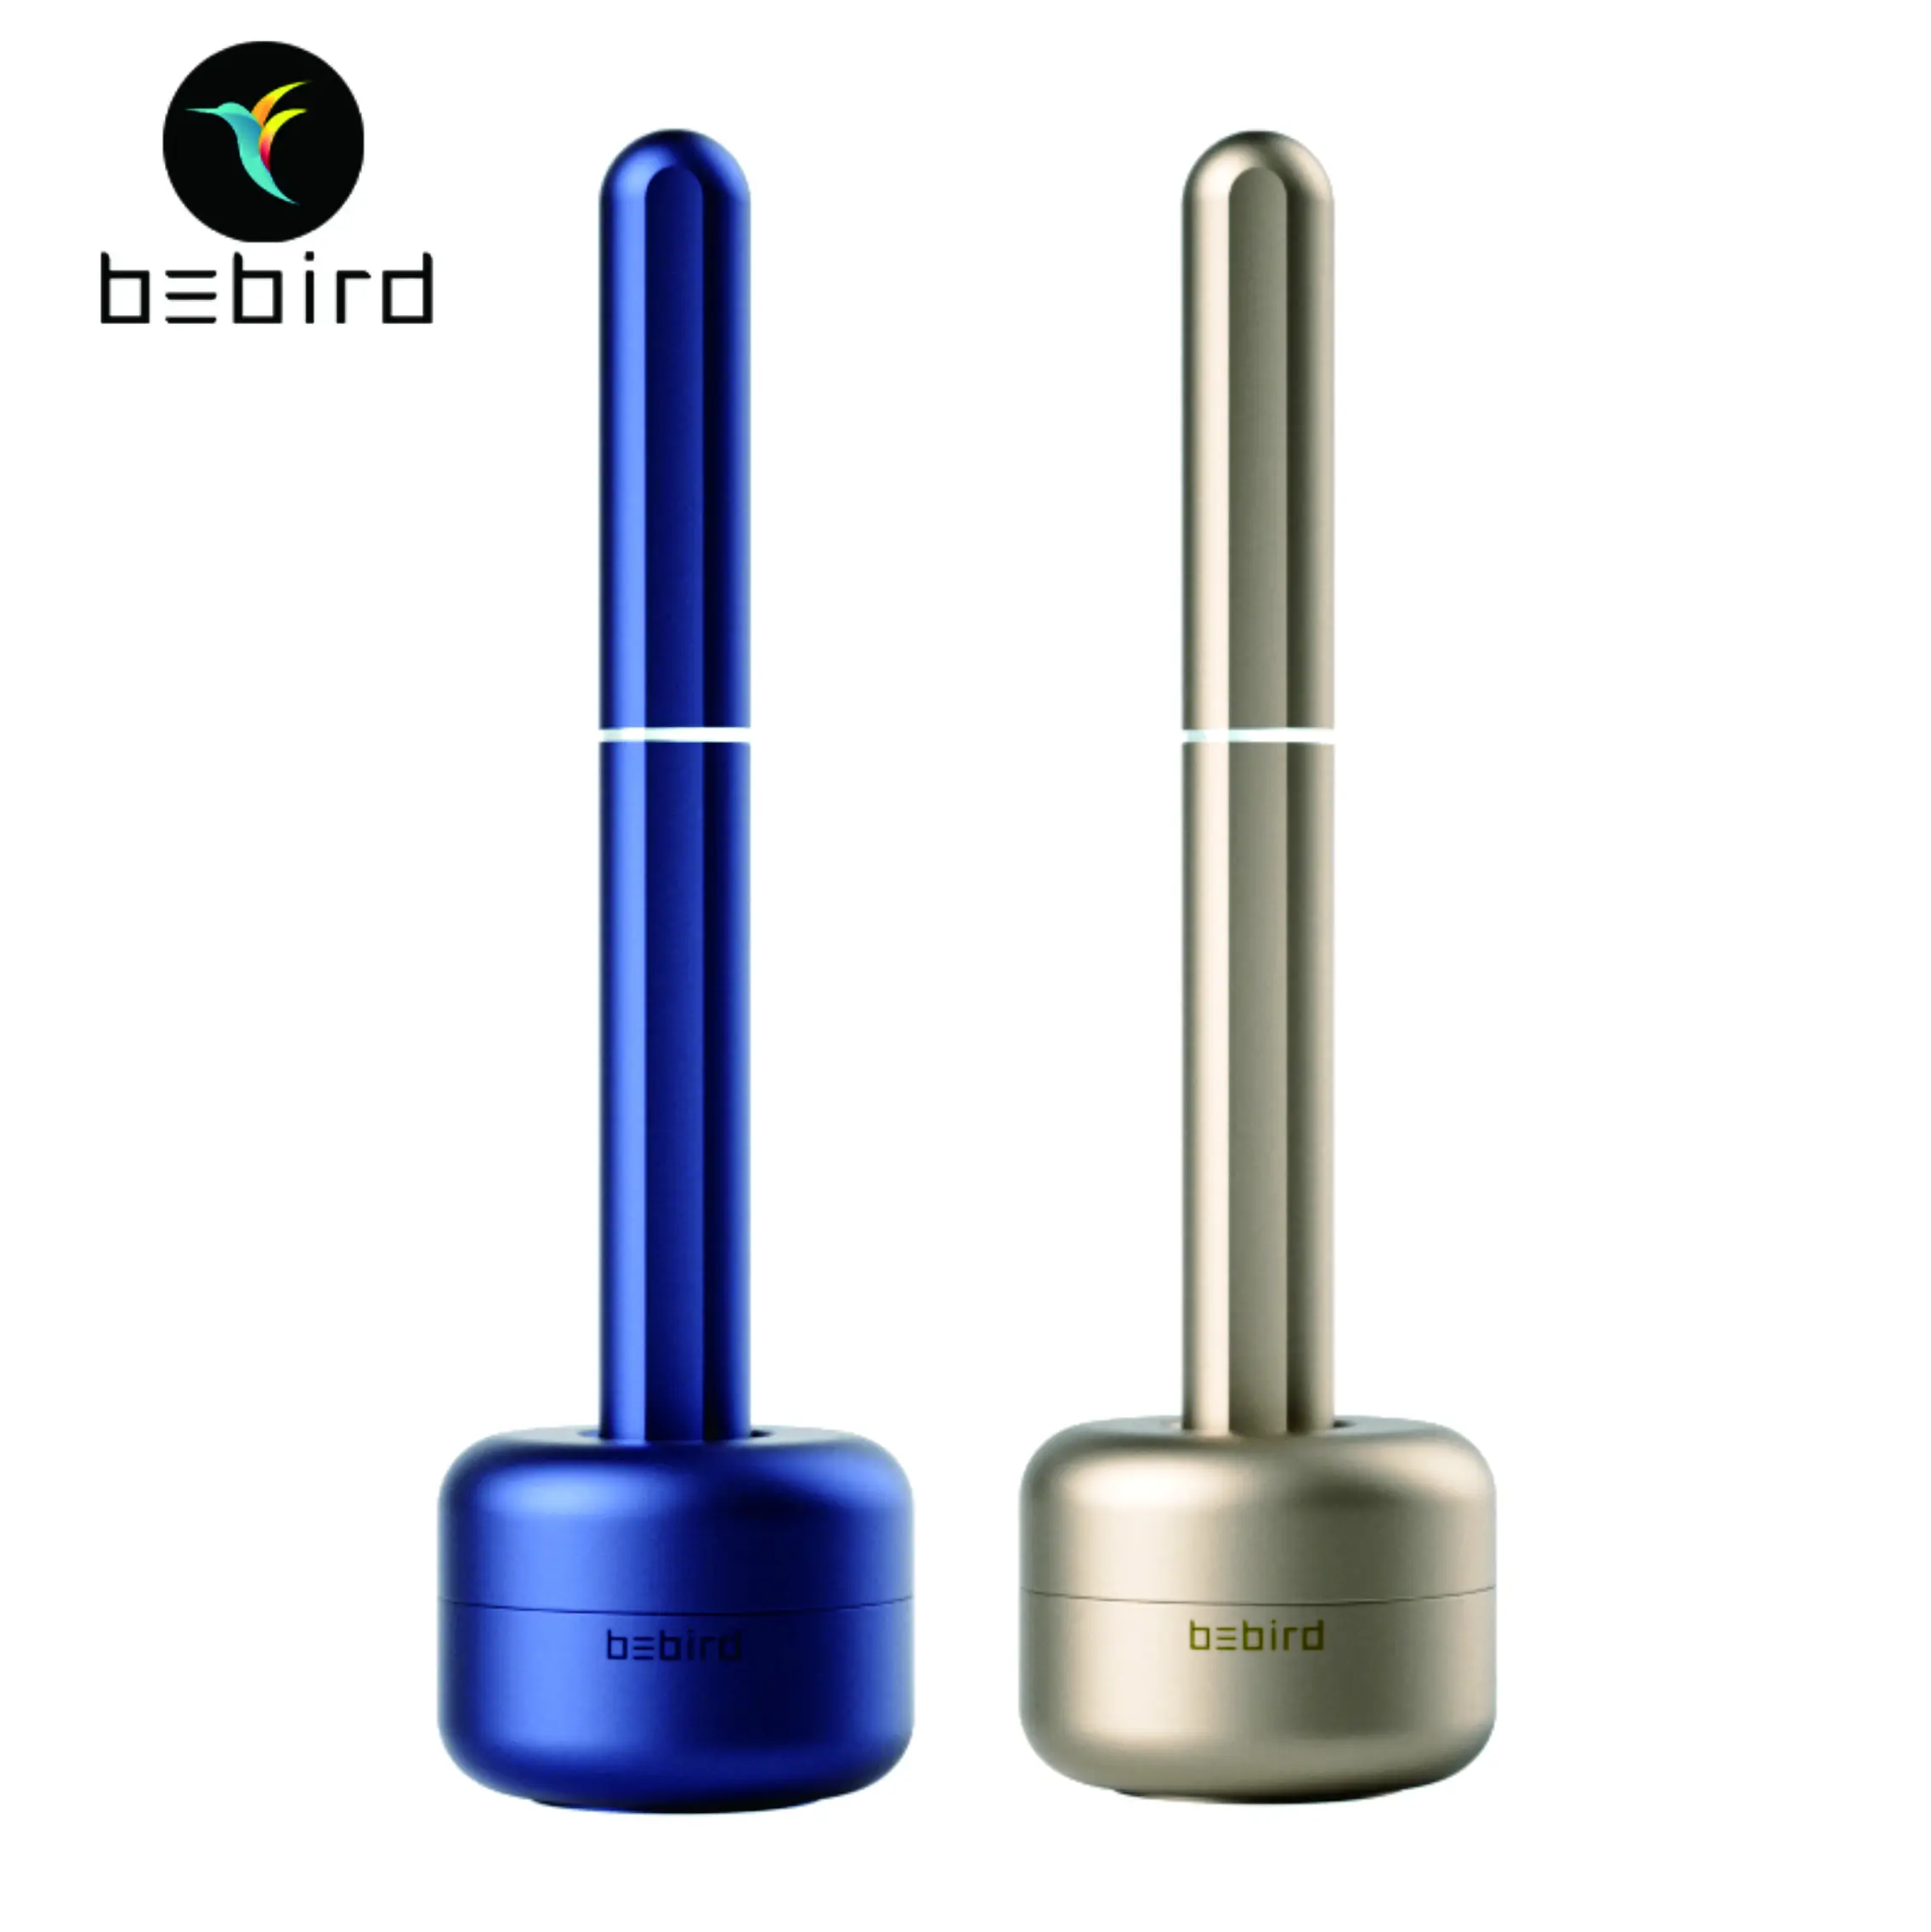 Cleaner Odos Bebird X17 Pro Visual Ear Scoop With Magnetic Charging Base Visual Earwax Remover App Working On iPhone Andorid